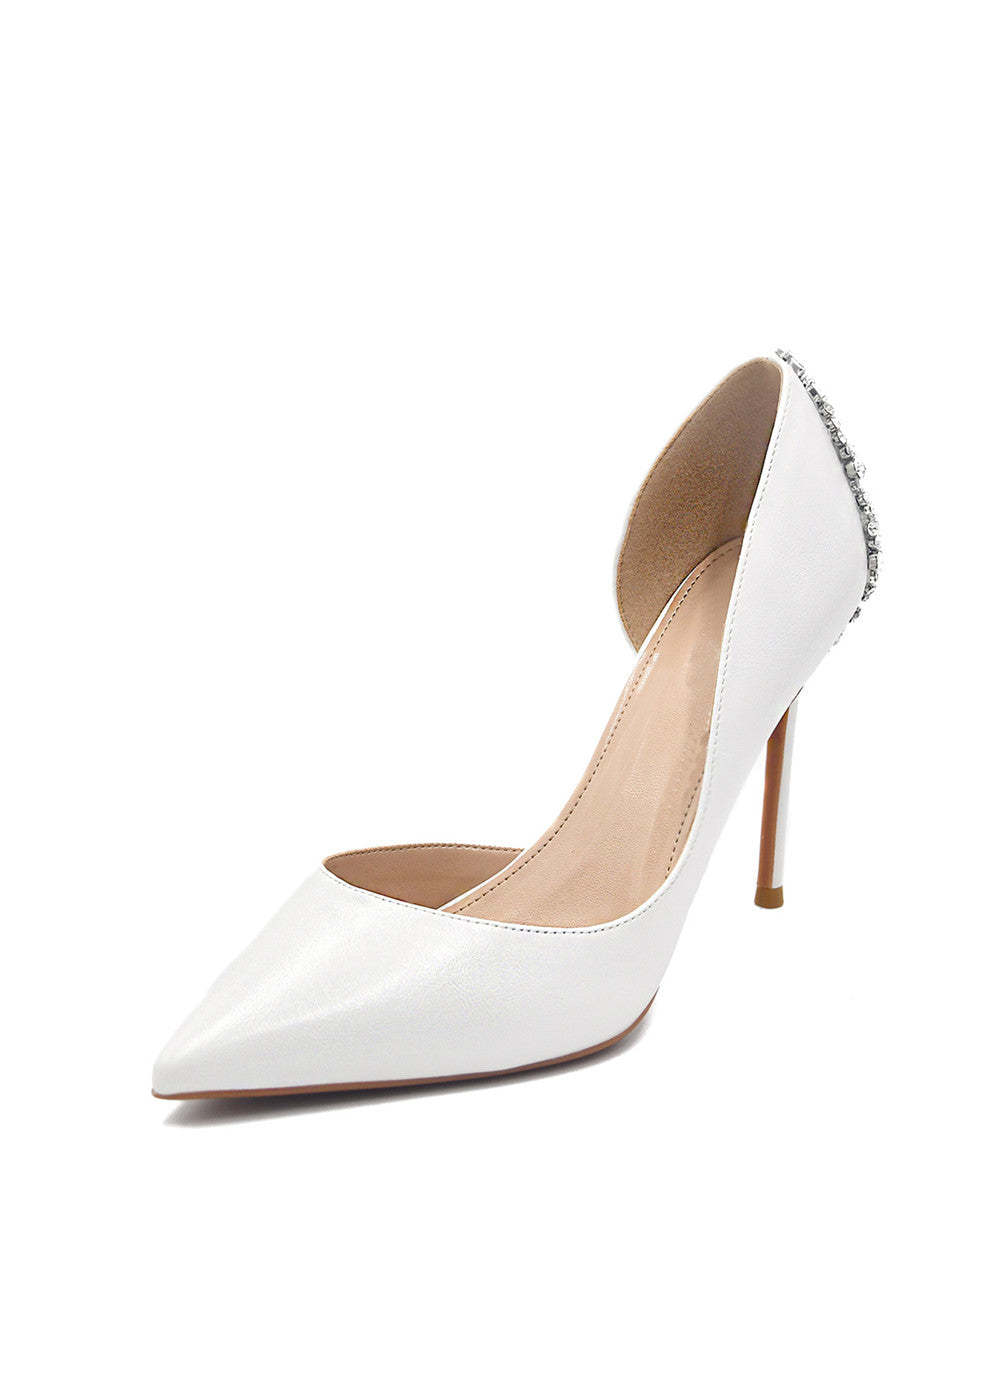 High Heel White Crystal Pointed Toe Wedding Shoes